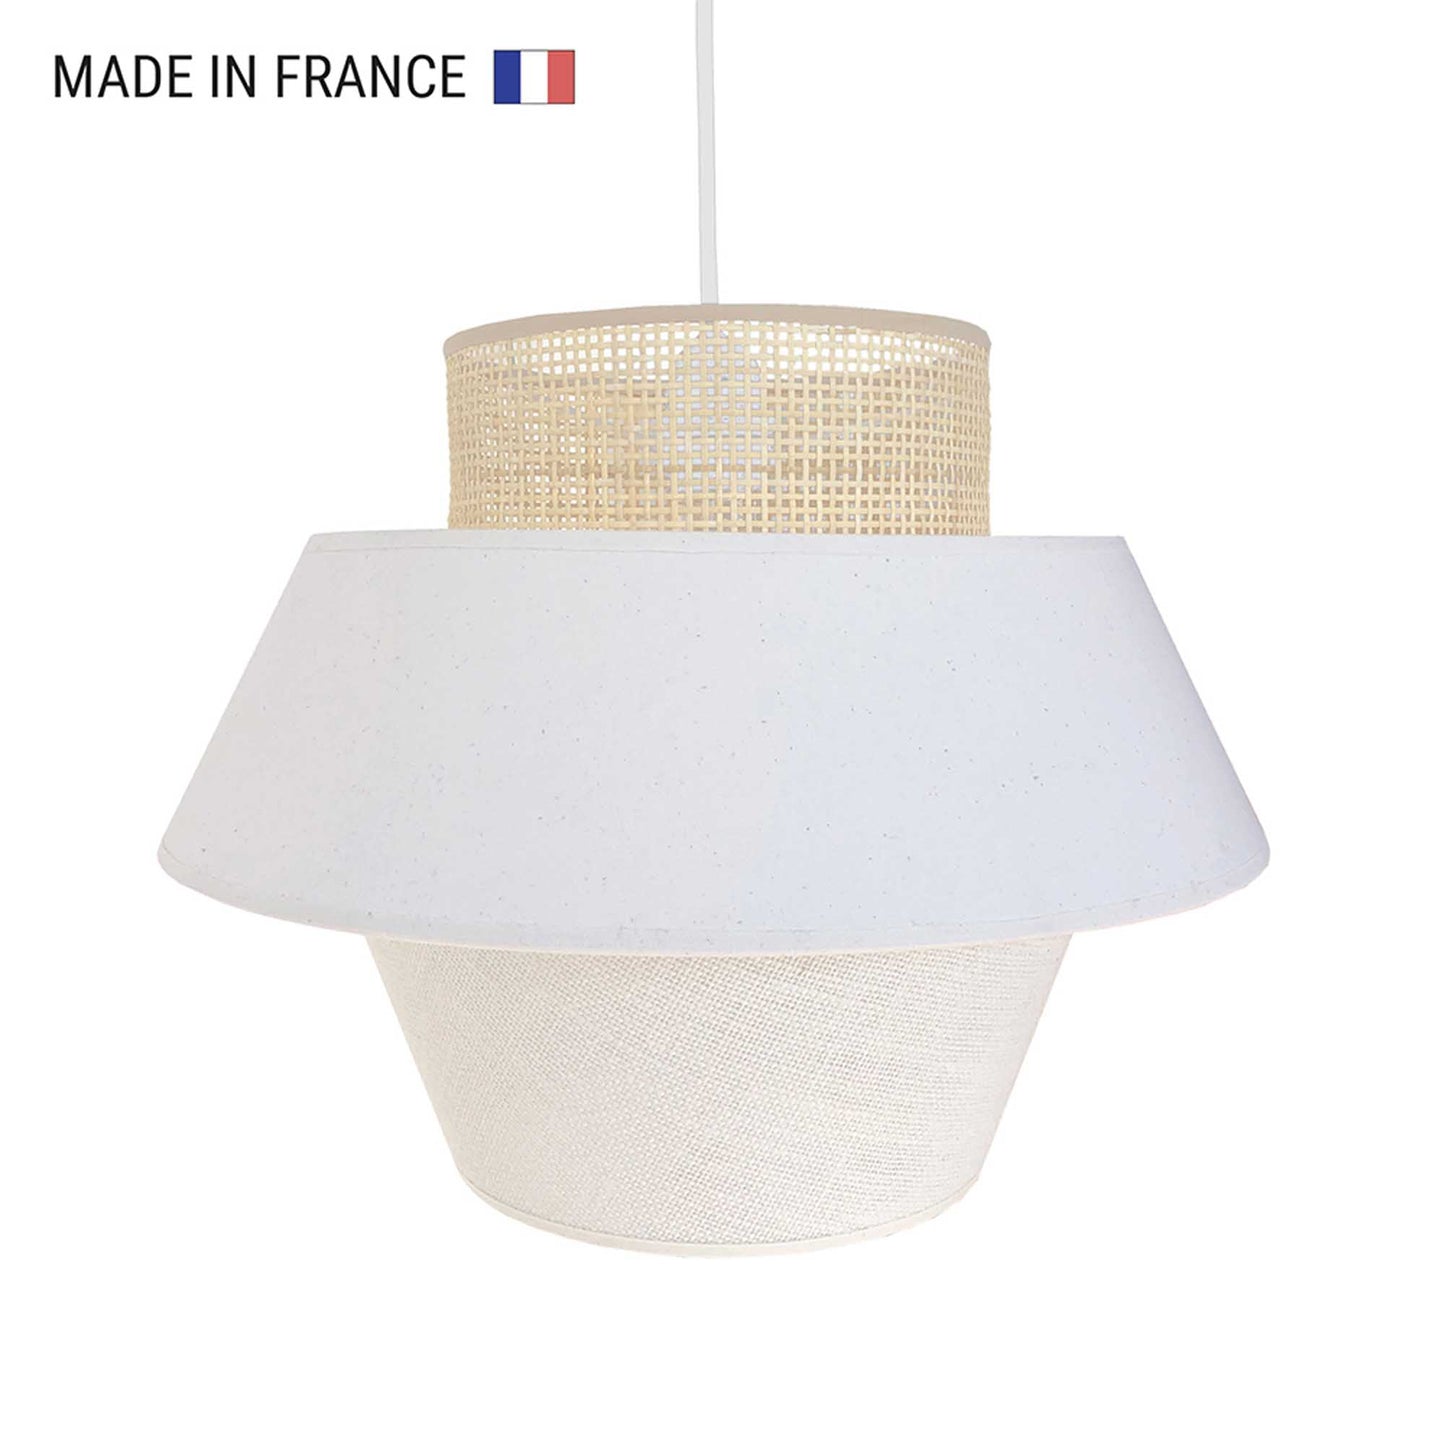 CAROLINA indoor lampshade in cotton and jute cane with metal strapping for E27 electric mount